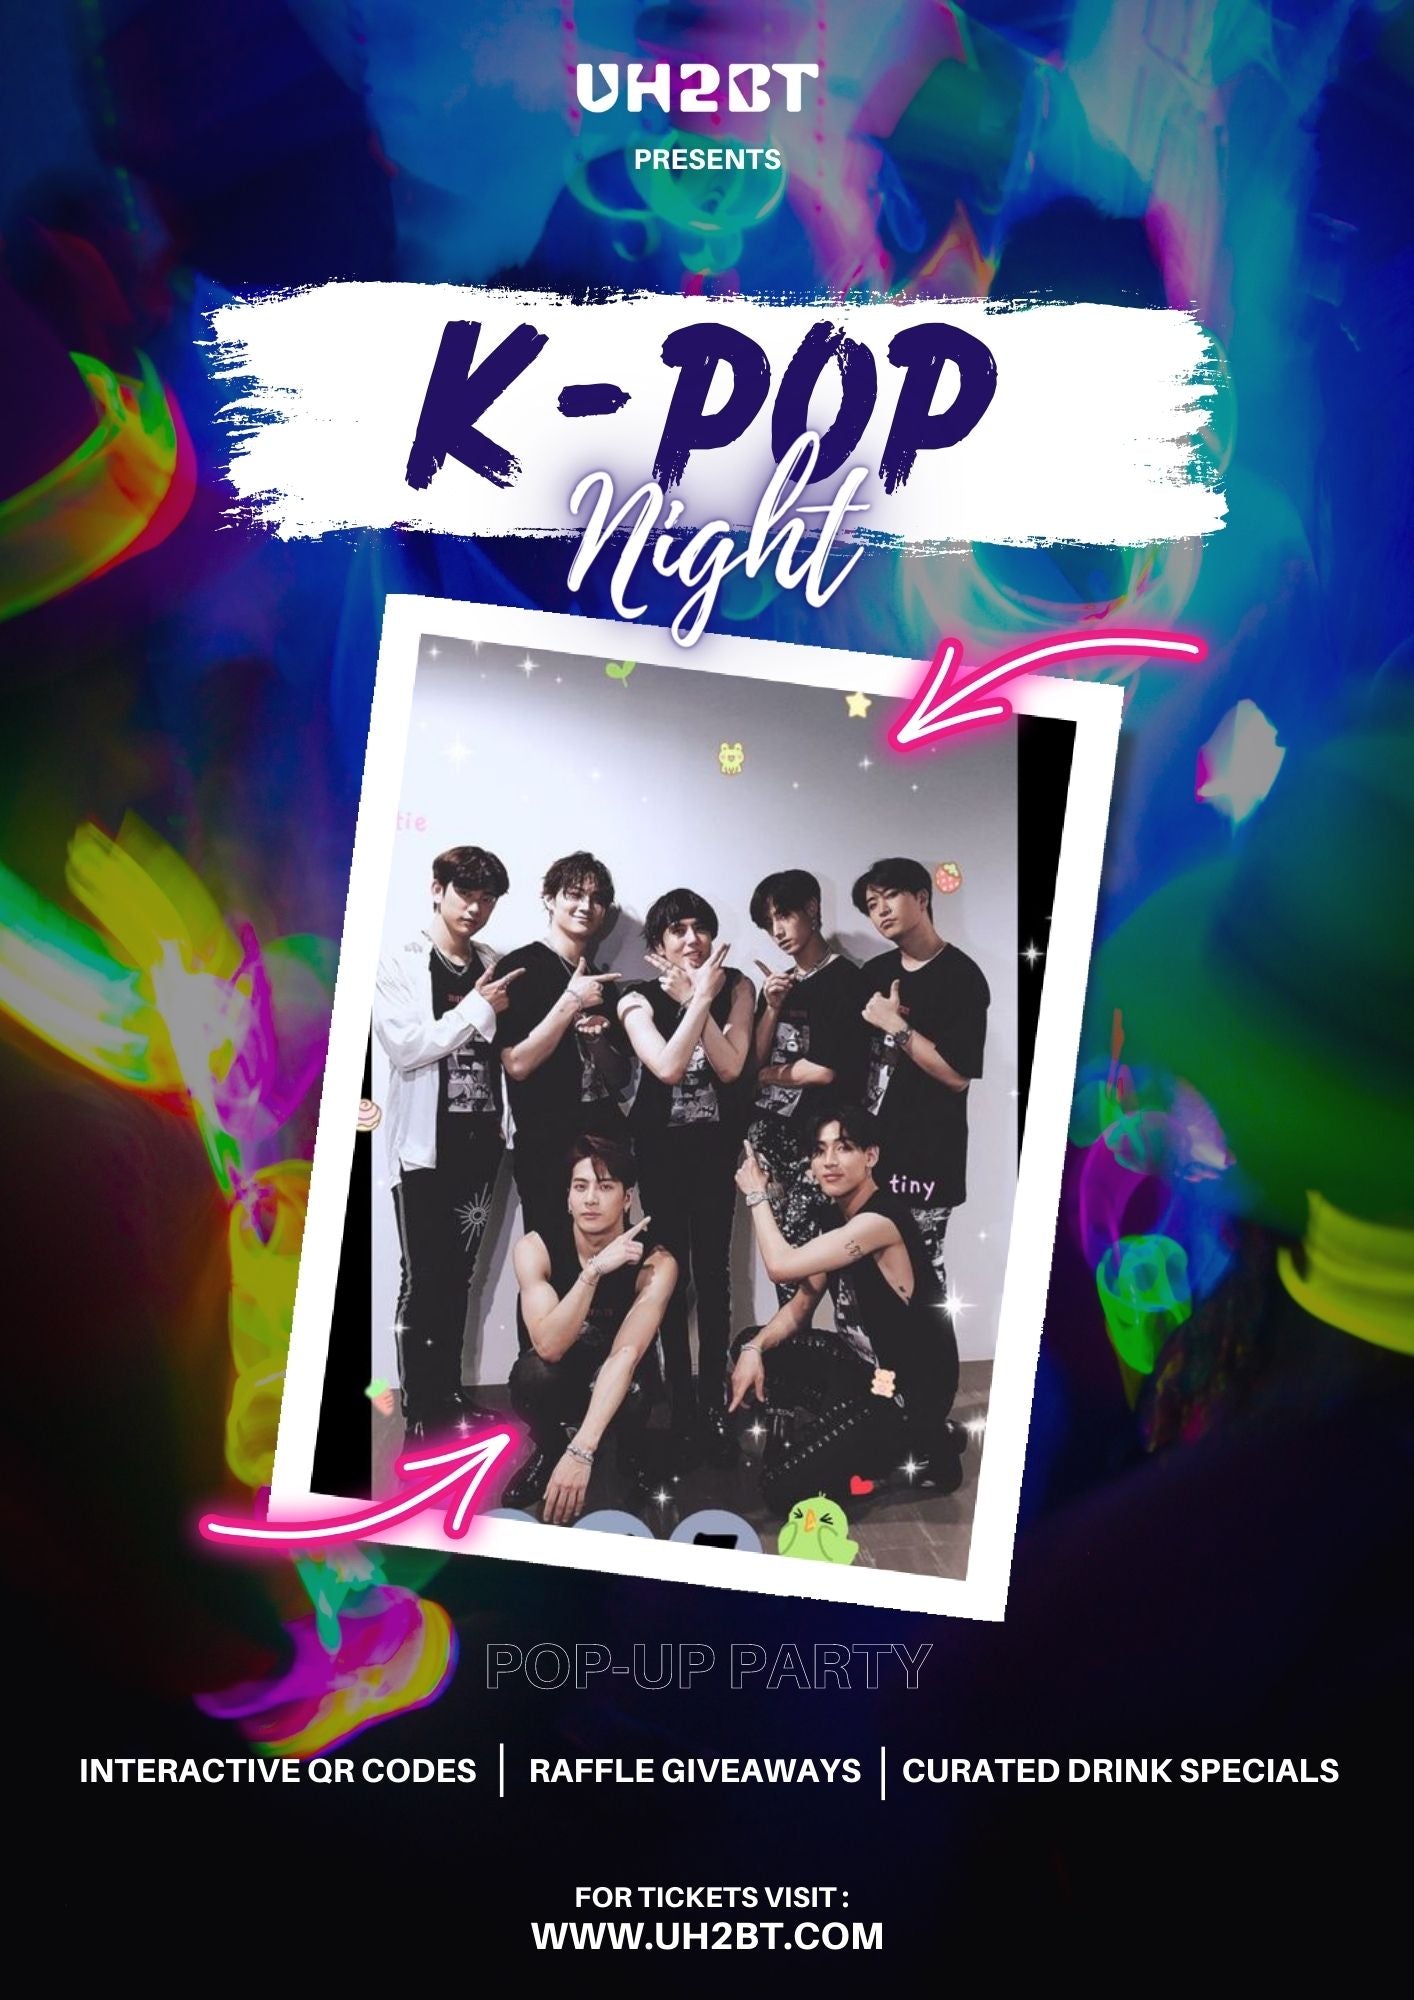 You Have to Be There! K-Pop Pop-Up Party